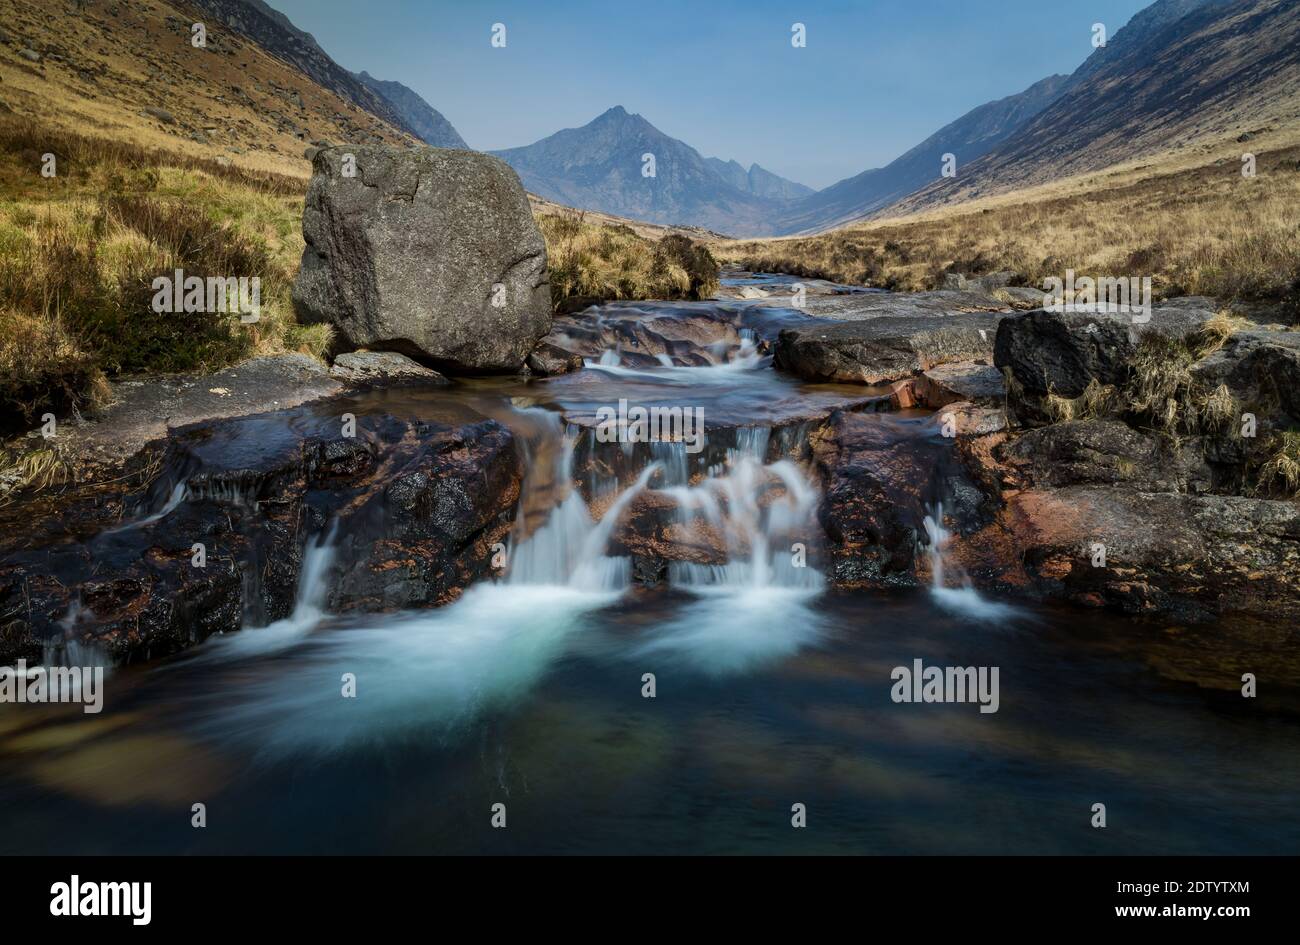 The small waterfall of Glen Rosa is a popular destinations for hikers on the scenic island of Arran in Scotland in the United Kingdo. Stock Photo